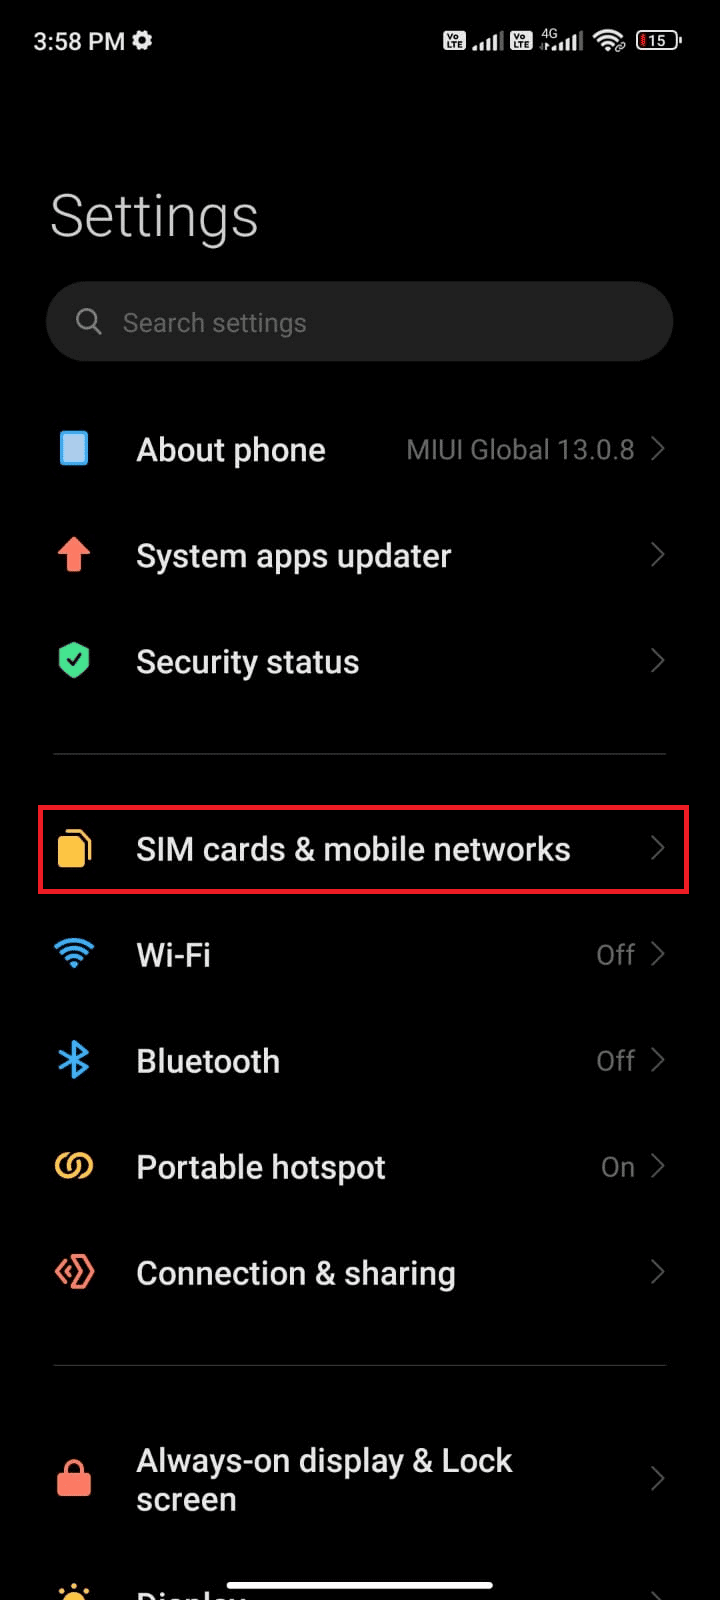 tap the SIM cards mobile networks option. Fix Google Play Store Error Checking for Updates